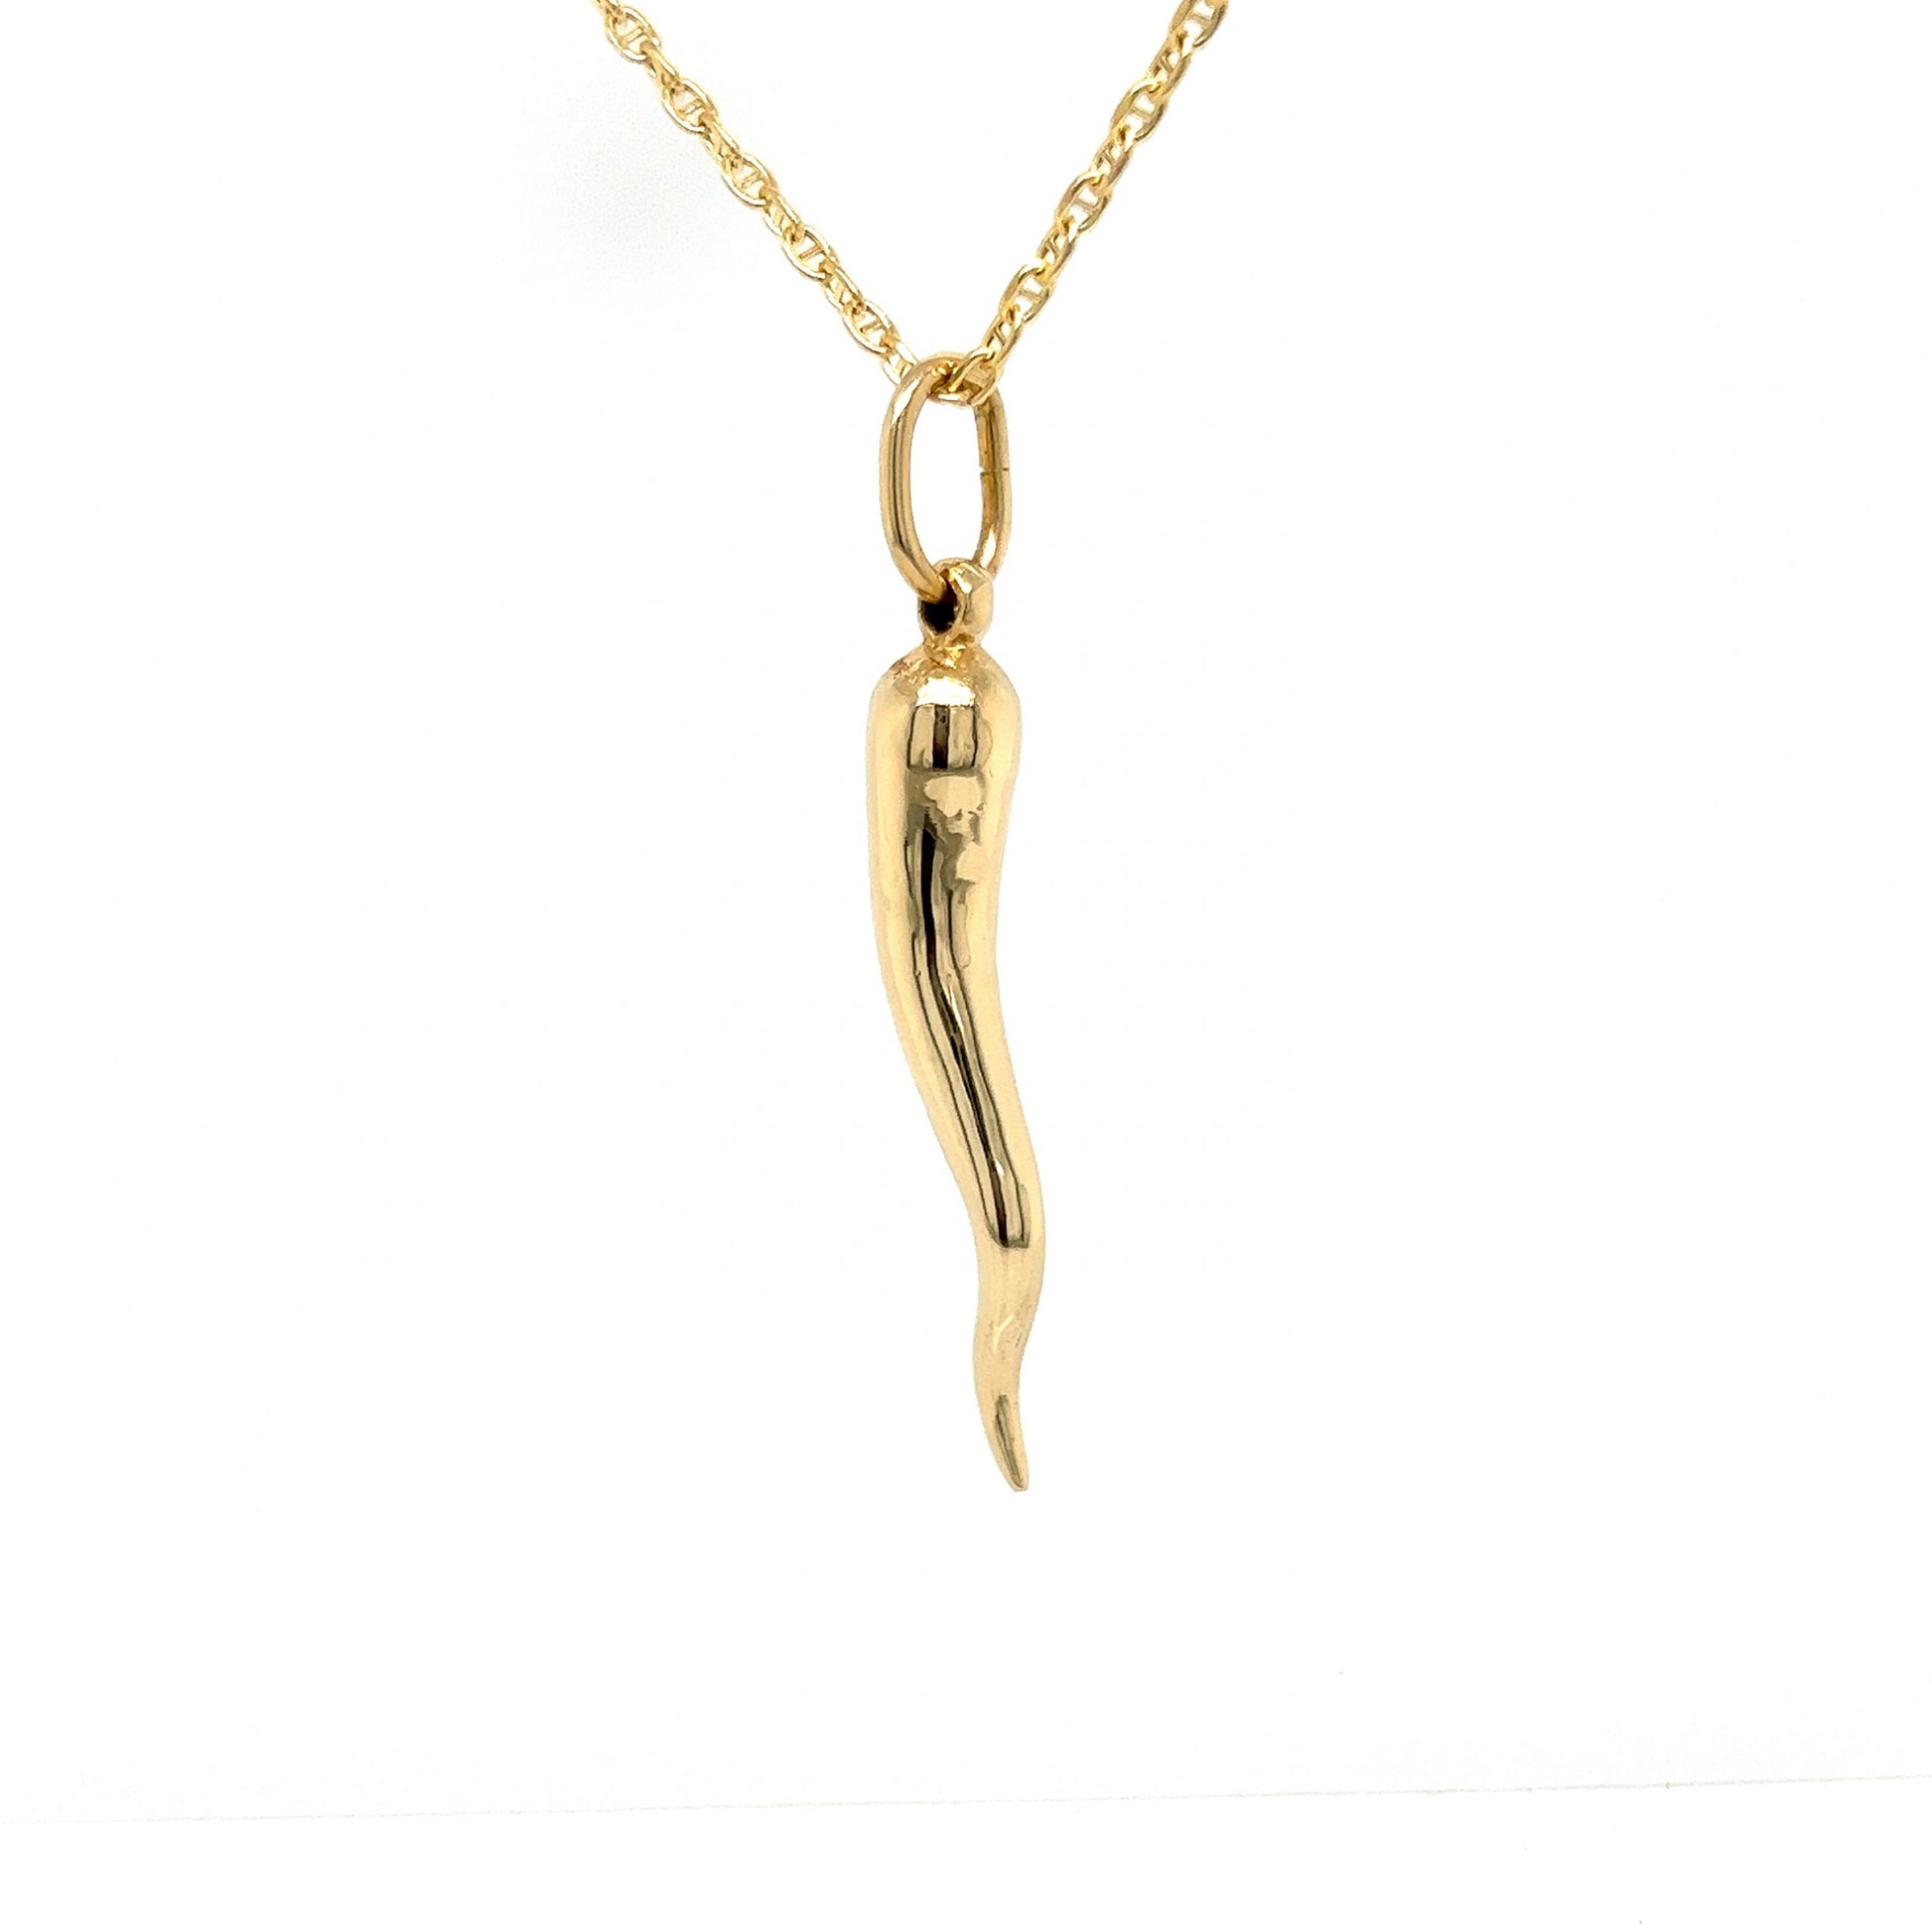 Good Luck Cornicello Pendant Necklace in 14k Yellow GoldComposition: 14 Karat Yellow GoldTotal Gram Weight: 8.9 gInscription: 14k 